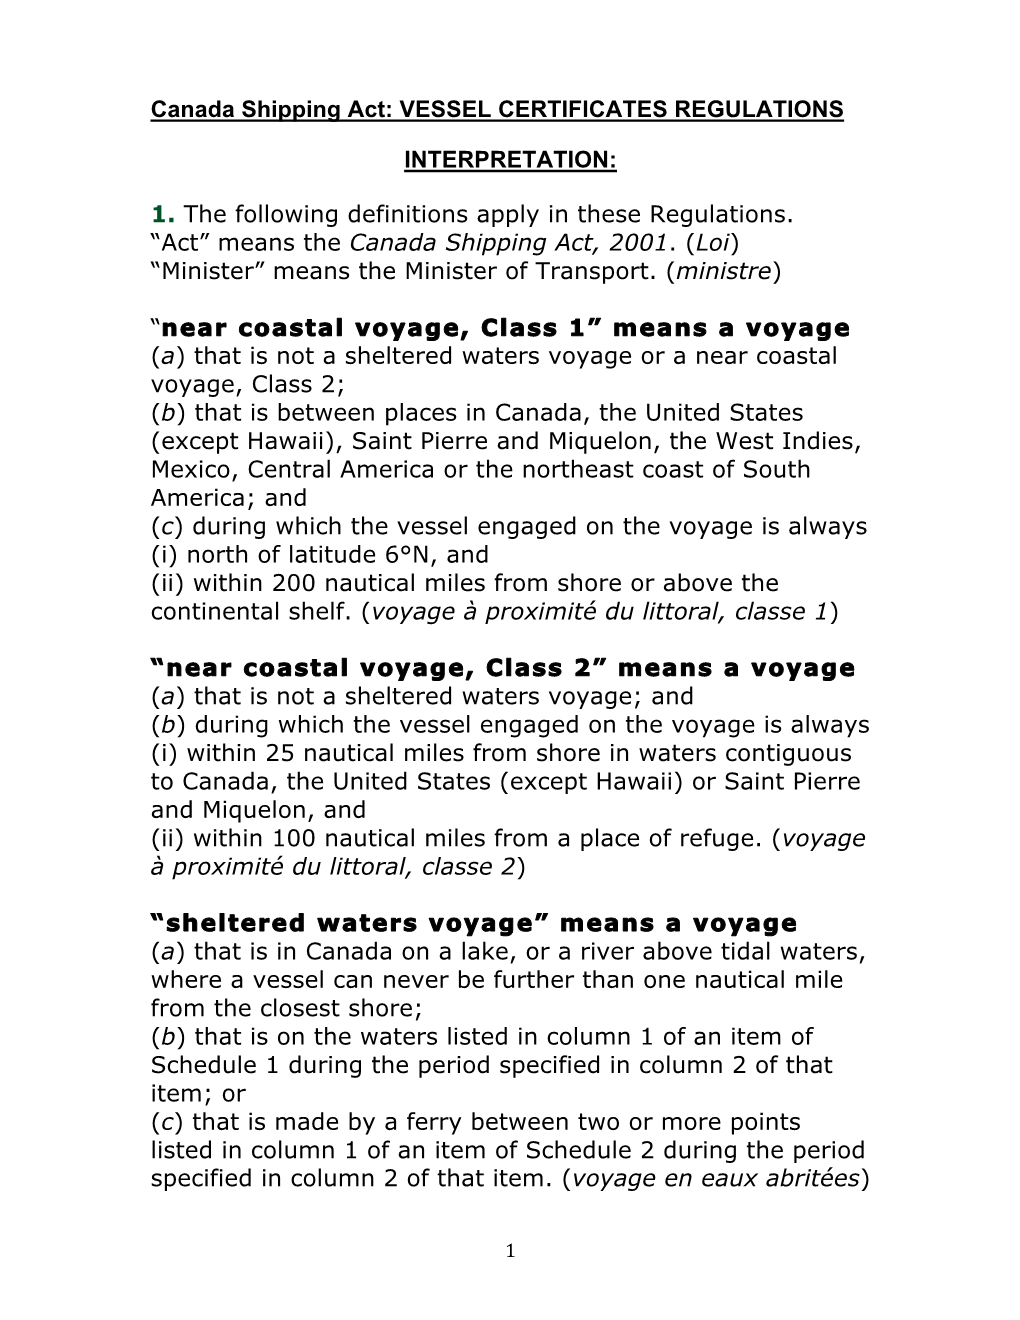 Voyage Classification Definitions